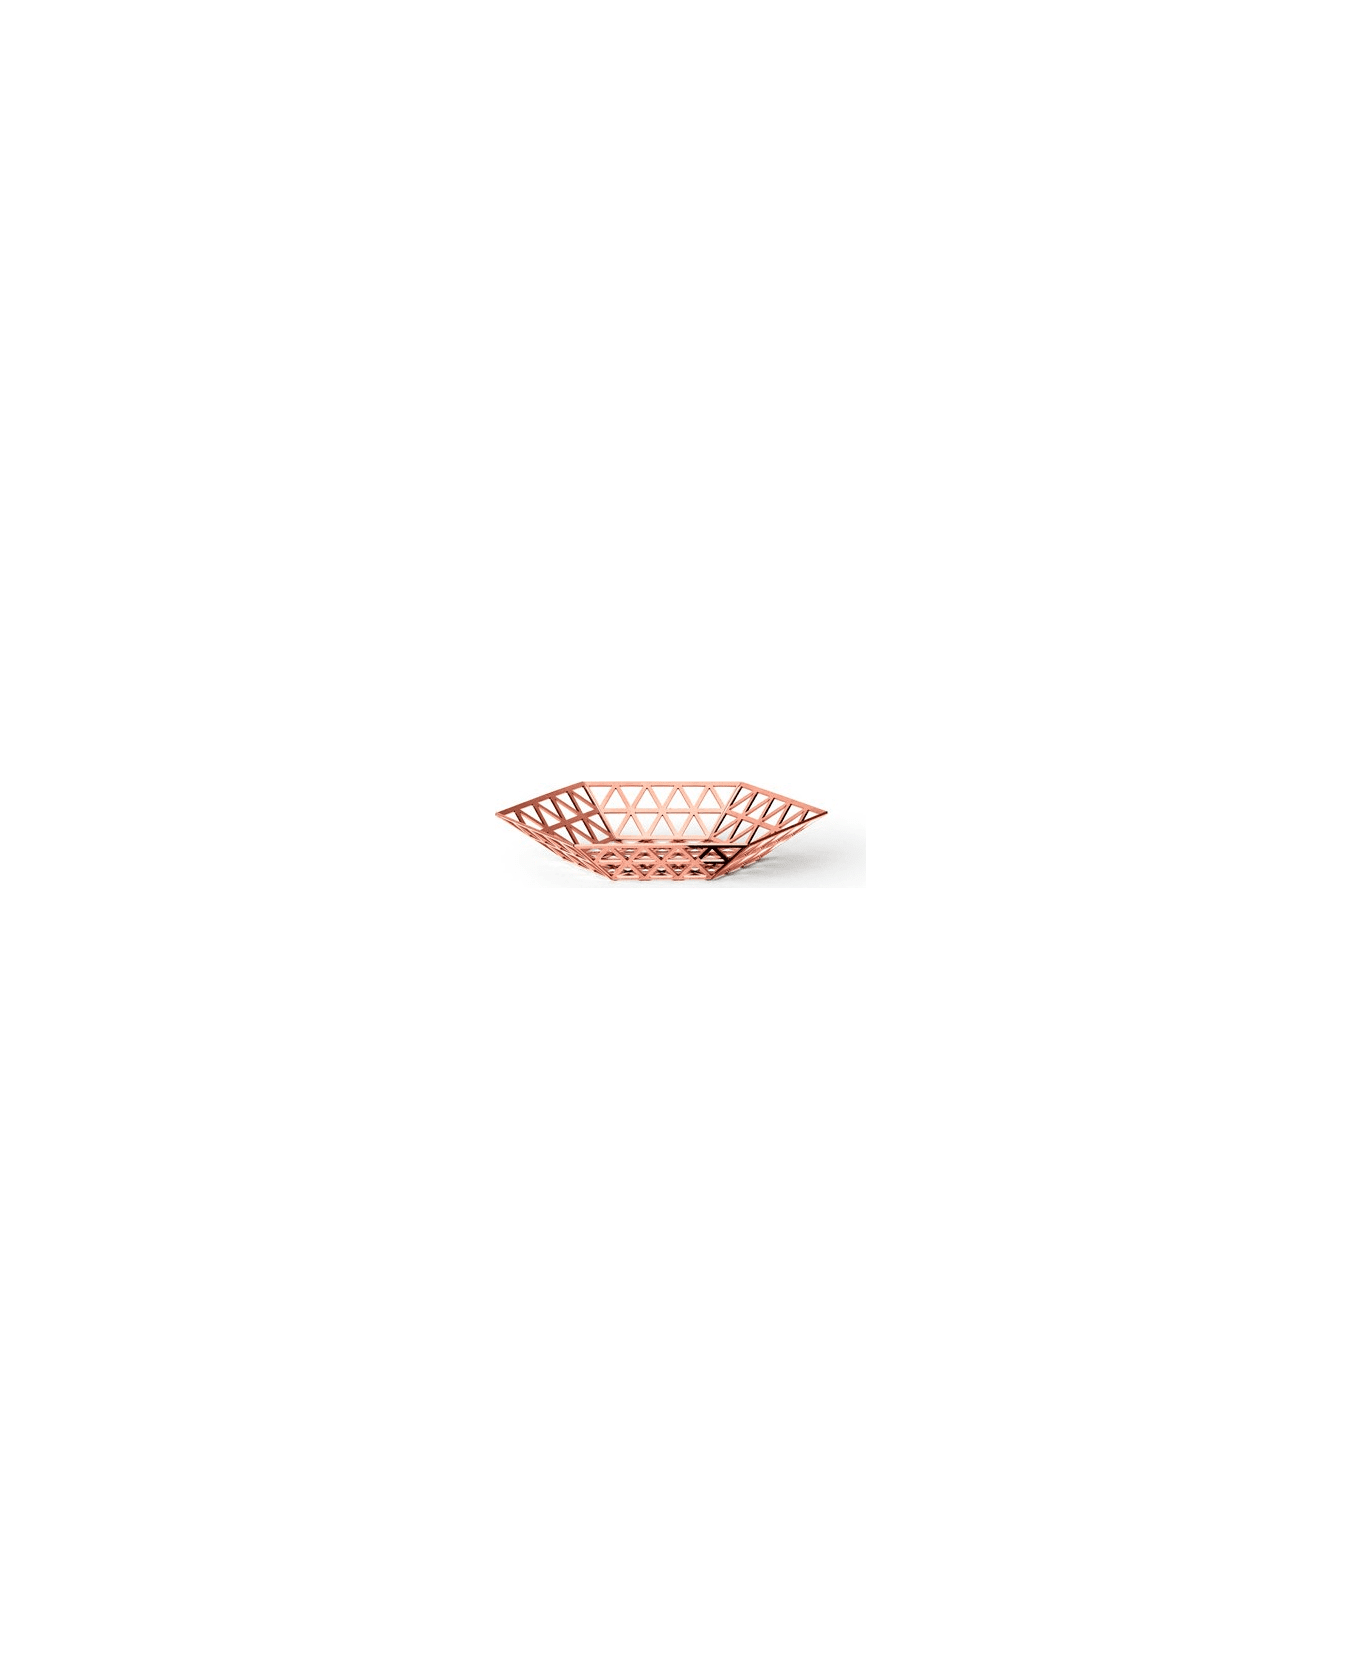 Ghidini 1961 Tip Top - Flat Tray Rose Gold - Rose gold